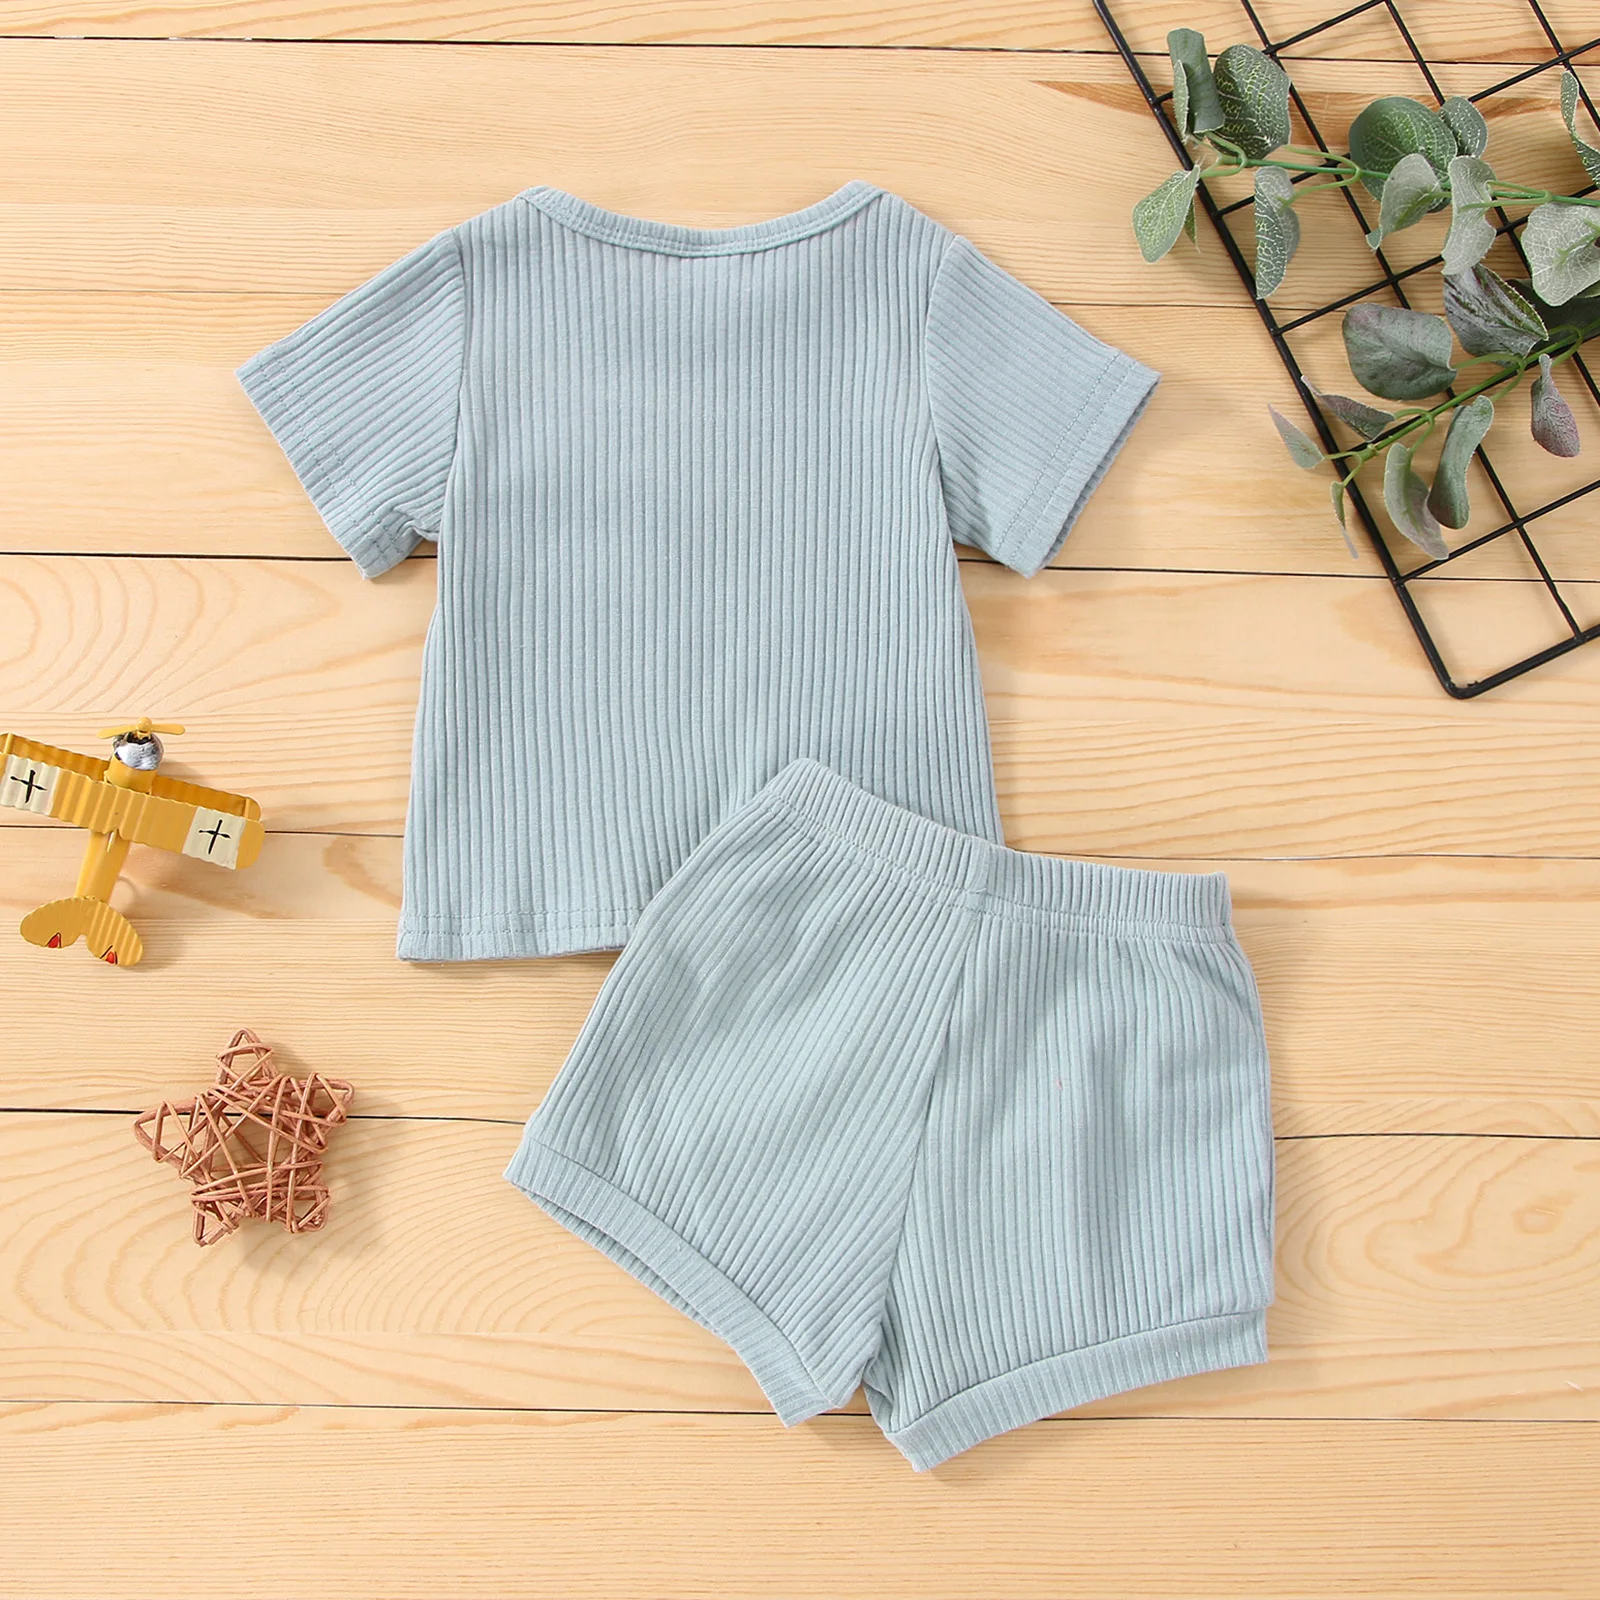 Lioraitiin 0-24M Newborn Infant Baby Girl Boy Outfits Sets Ribbed Knit Short Sleeve T-shirt Short Pant Solid Color Clothes Set Baby Clothing Set cheap